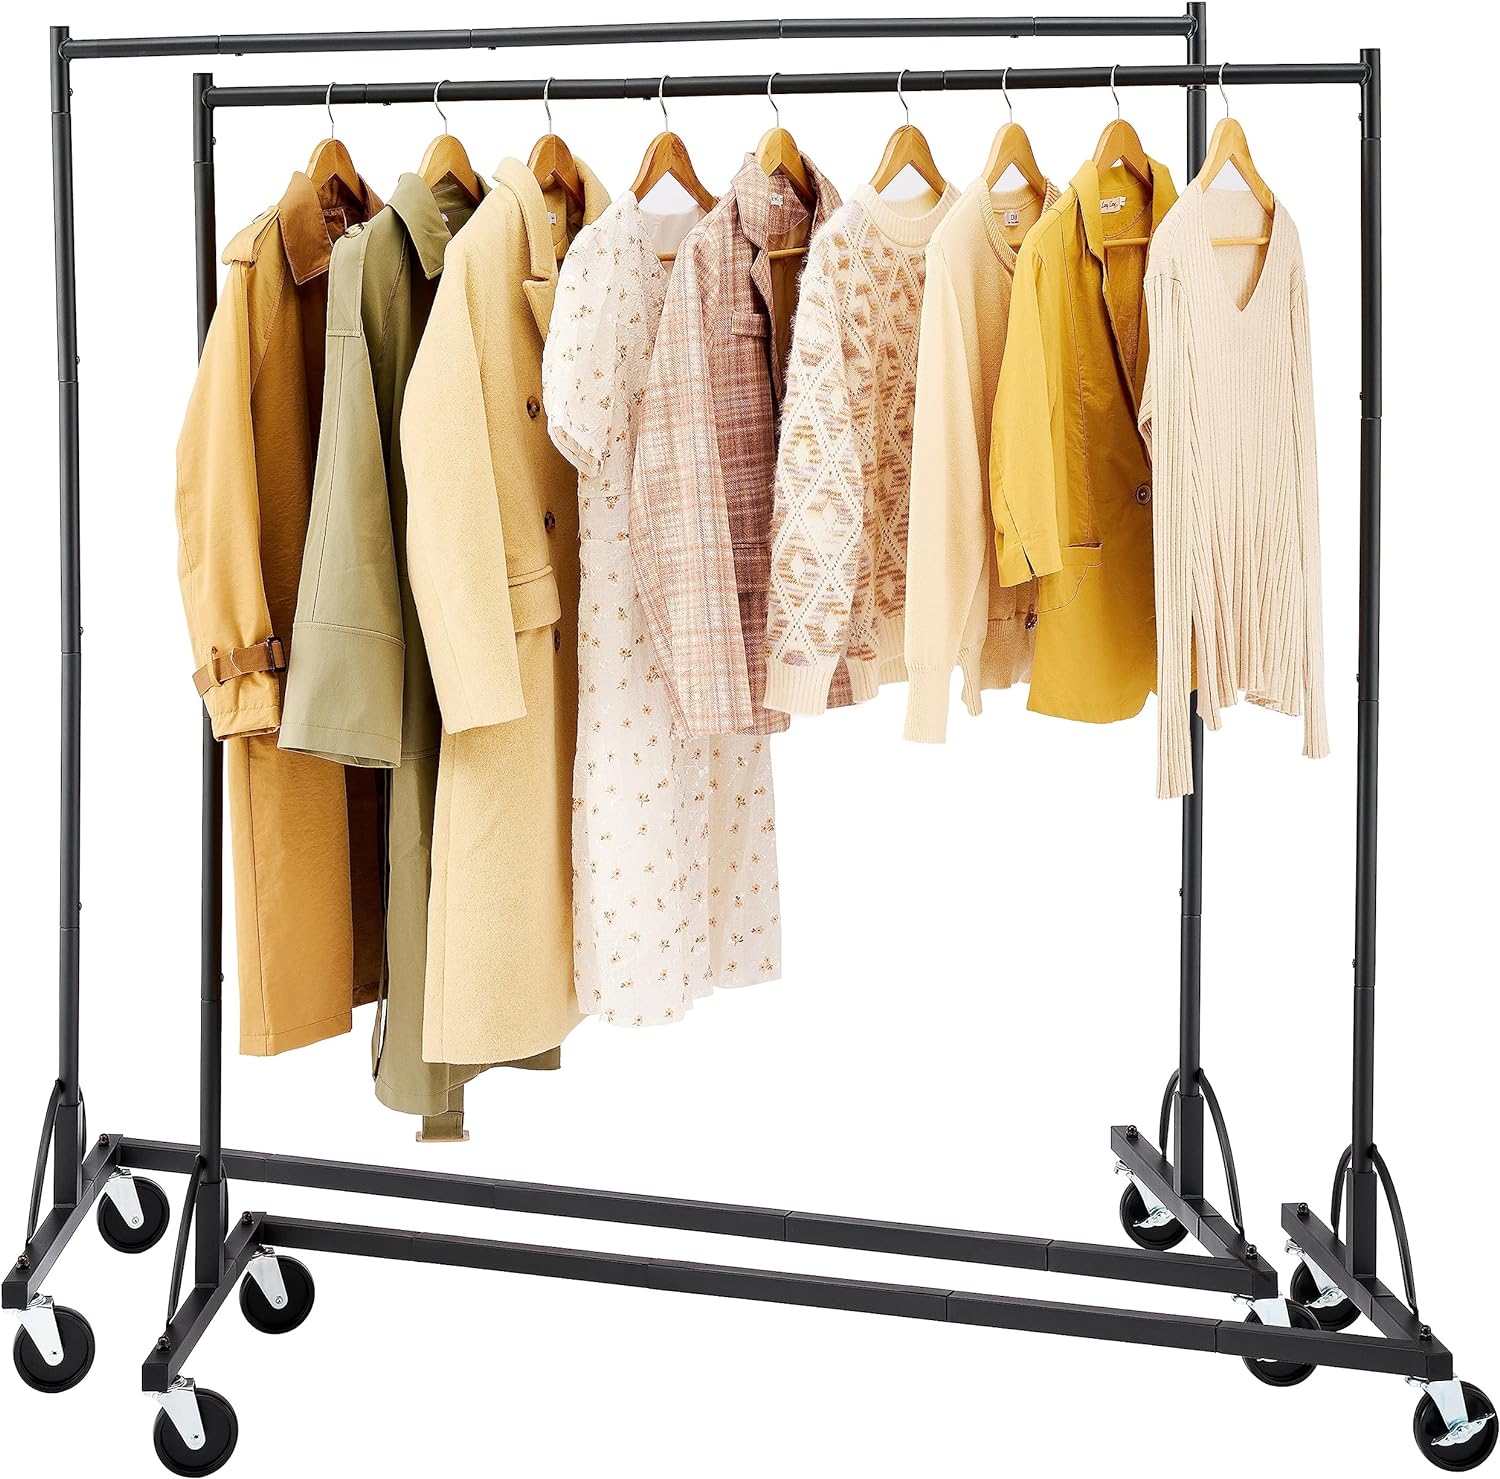 A really excellent rack, strong and durable. Great product holds a lot clothes more than I thought. Very easy to put together and roll around. No hassle in anyway with this.